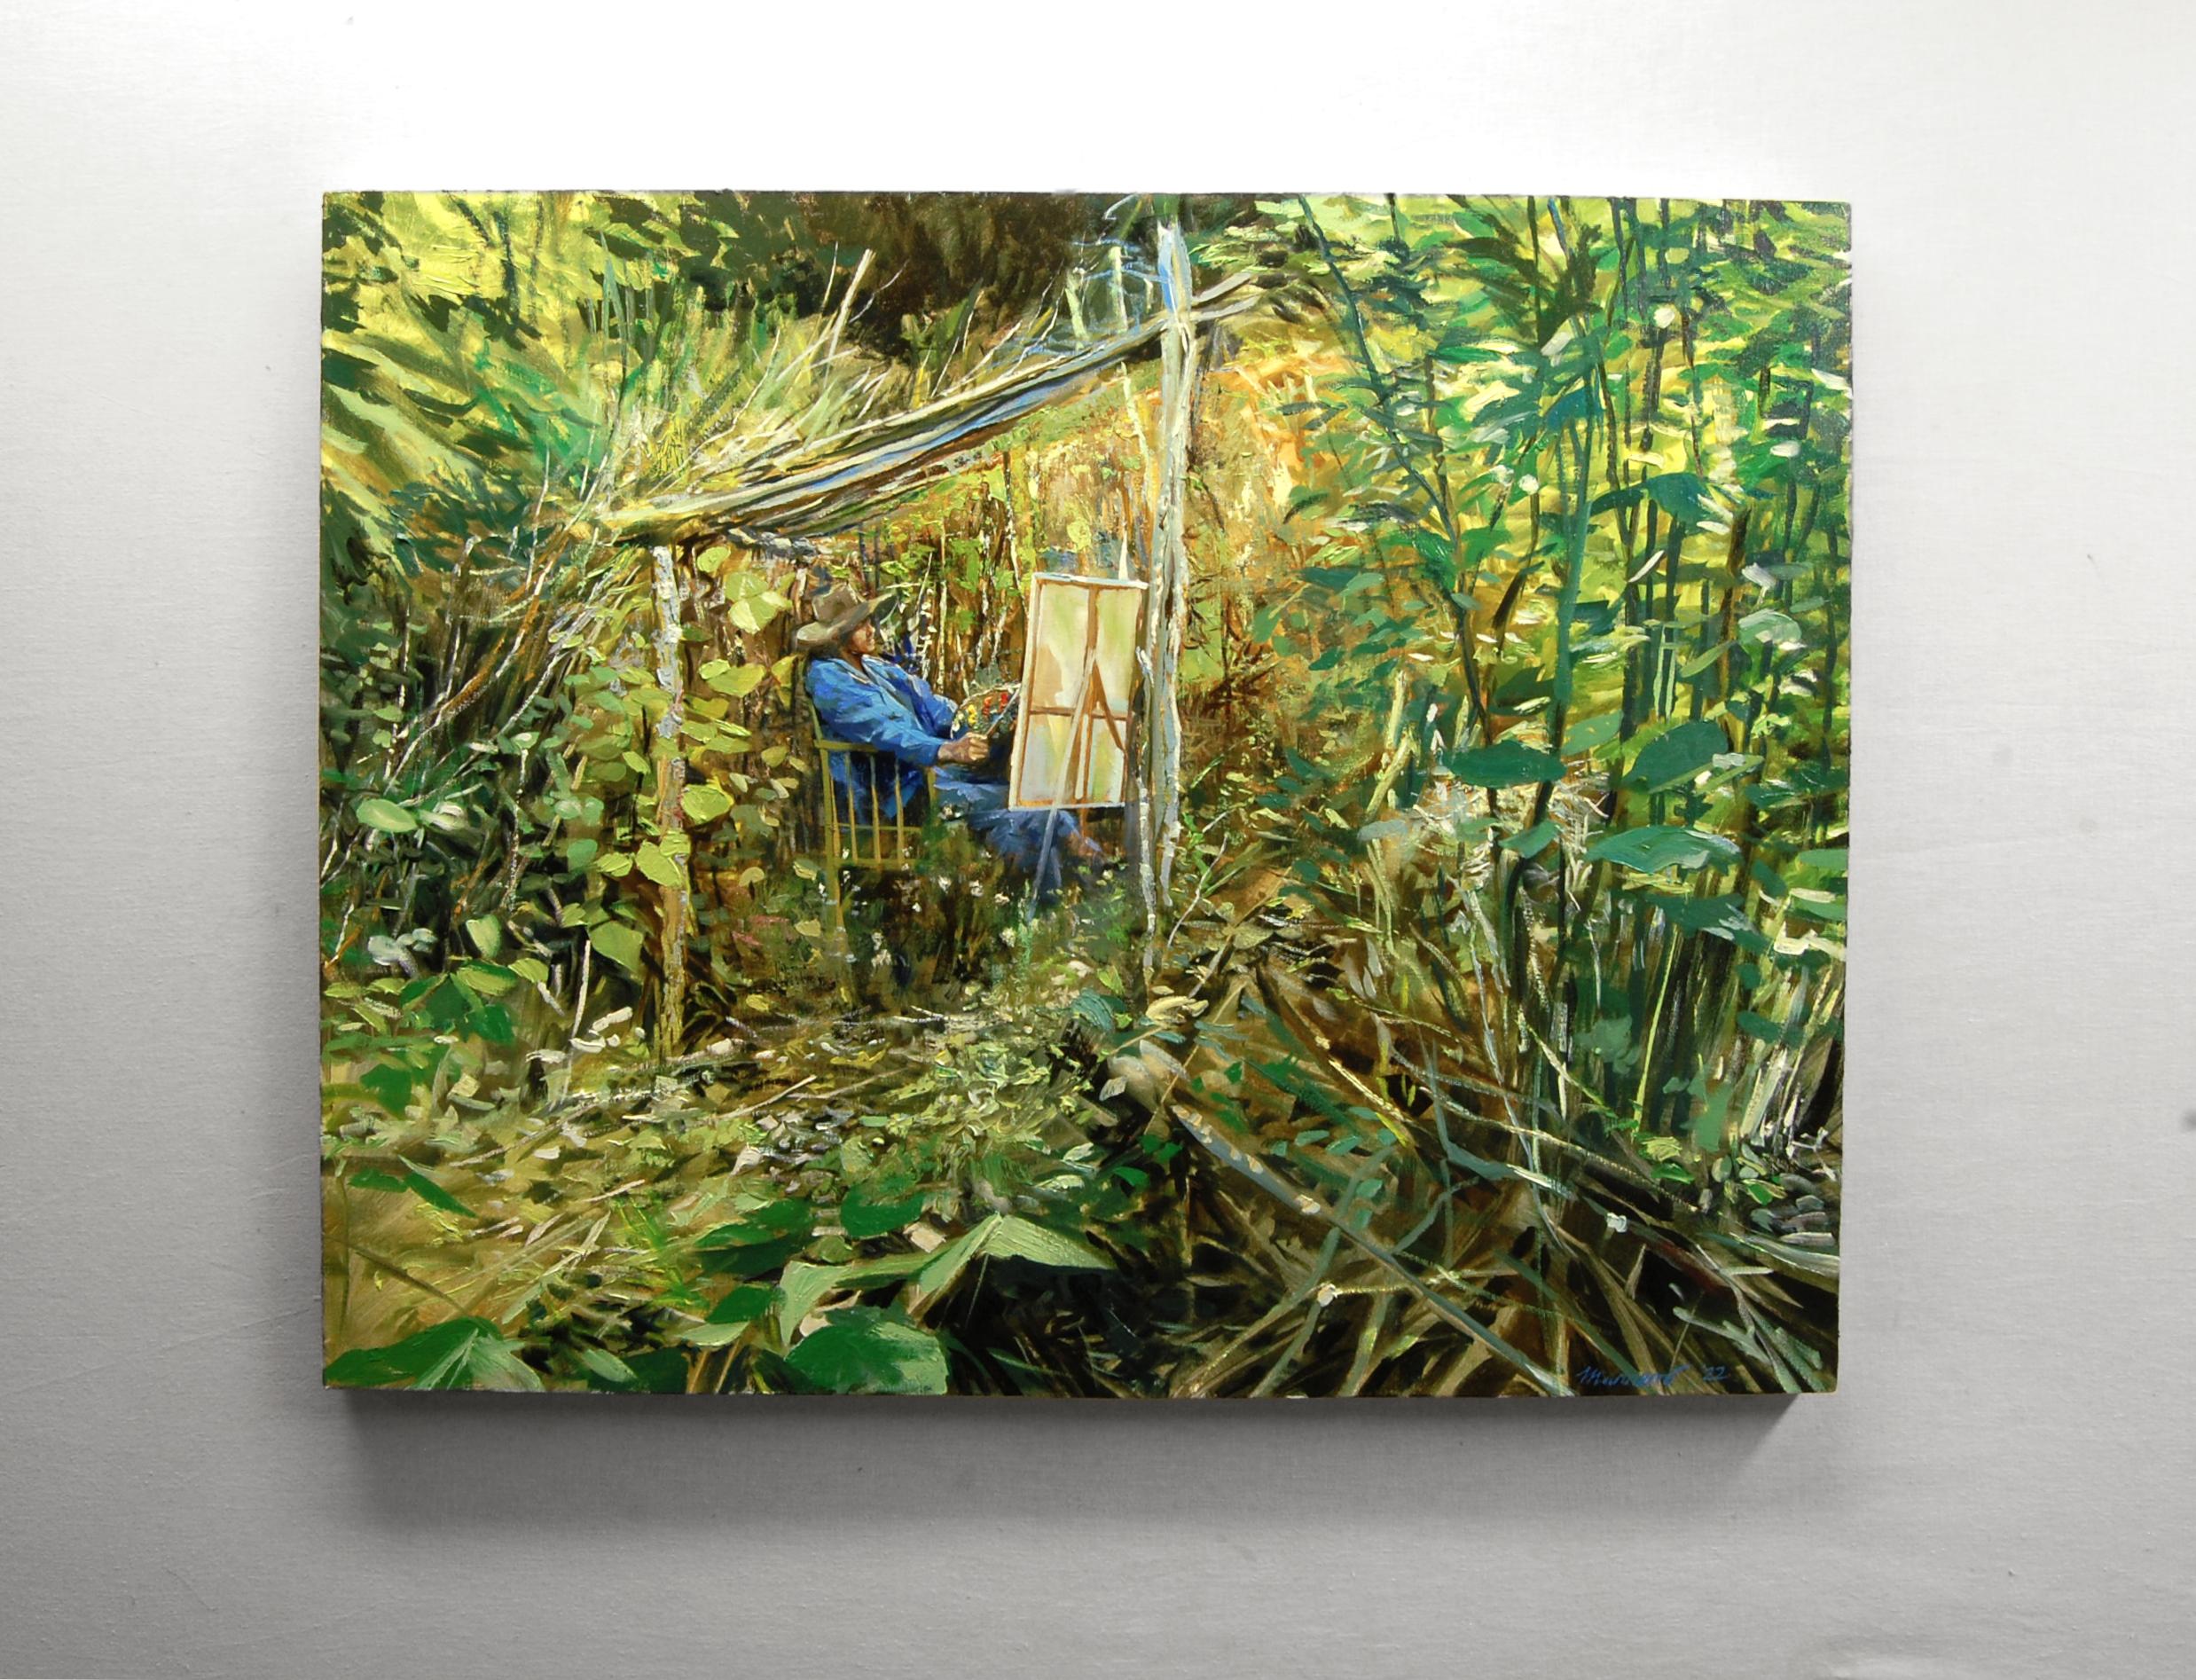 <p>Artist Comments<br>Artist Onelio Marrero paints an impressionist scene of a man painting under a makeshift structure of fallen trees. The idyllic shelter shades him from the sun. He draws inspiration from one of his walks along an area of wetland